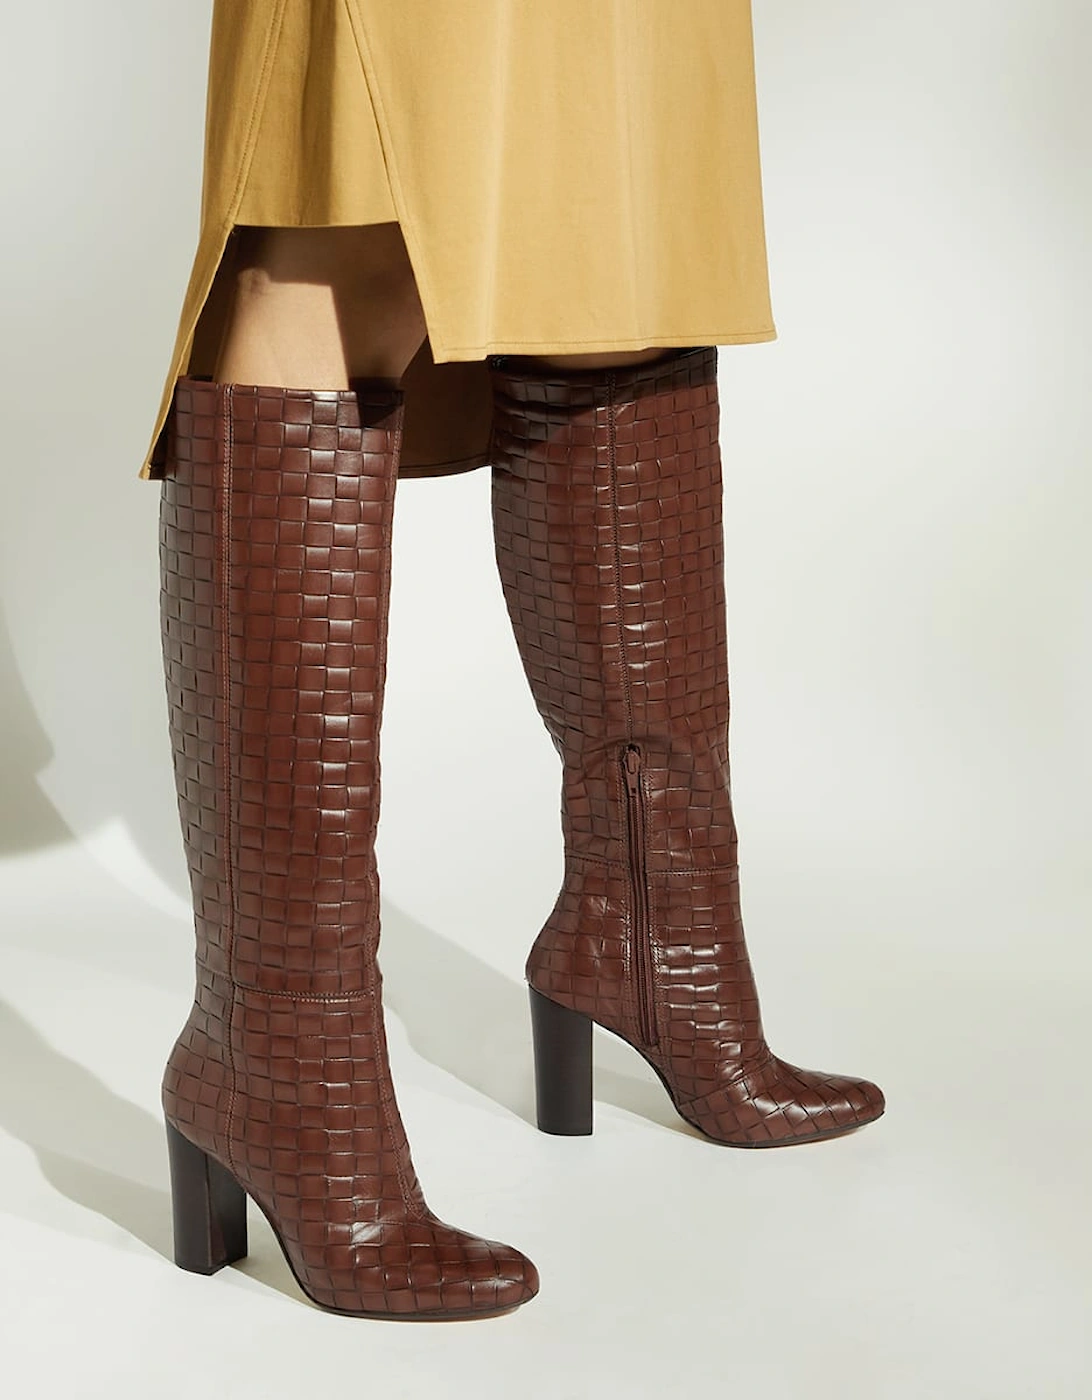 Ladies Sonoma - Woven-Leather Knee-High Boots